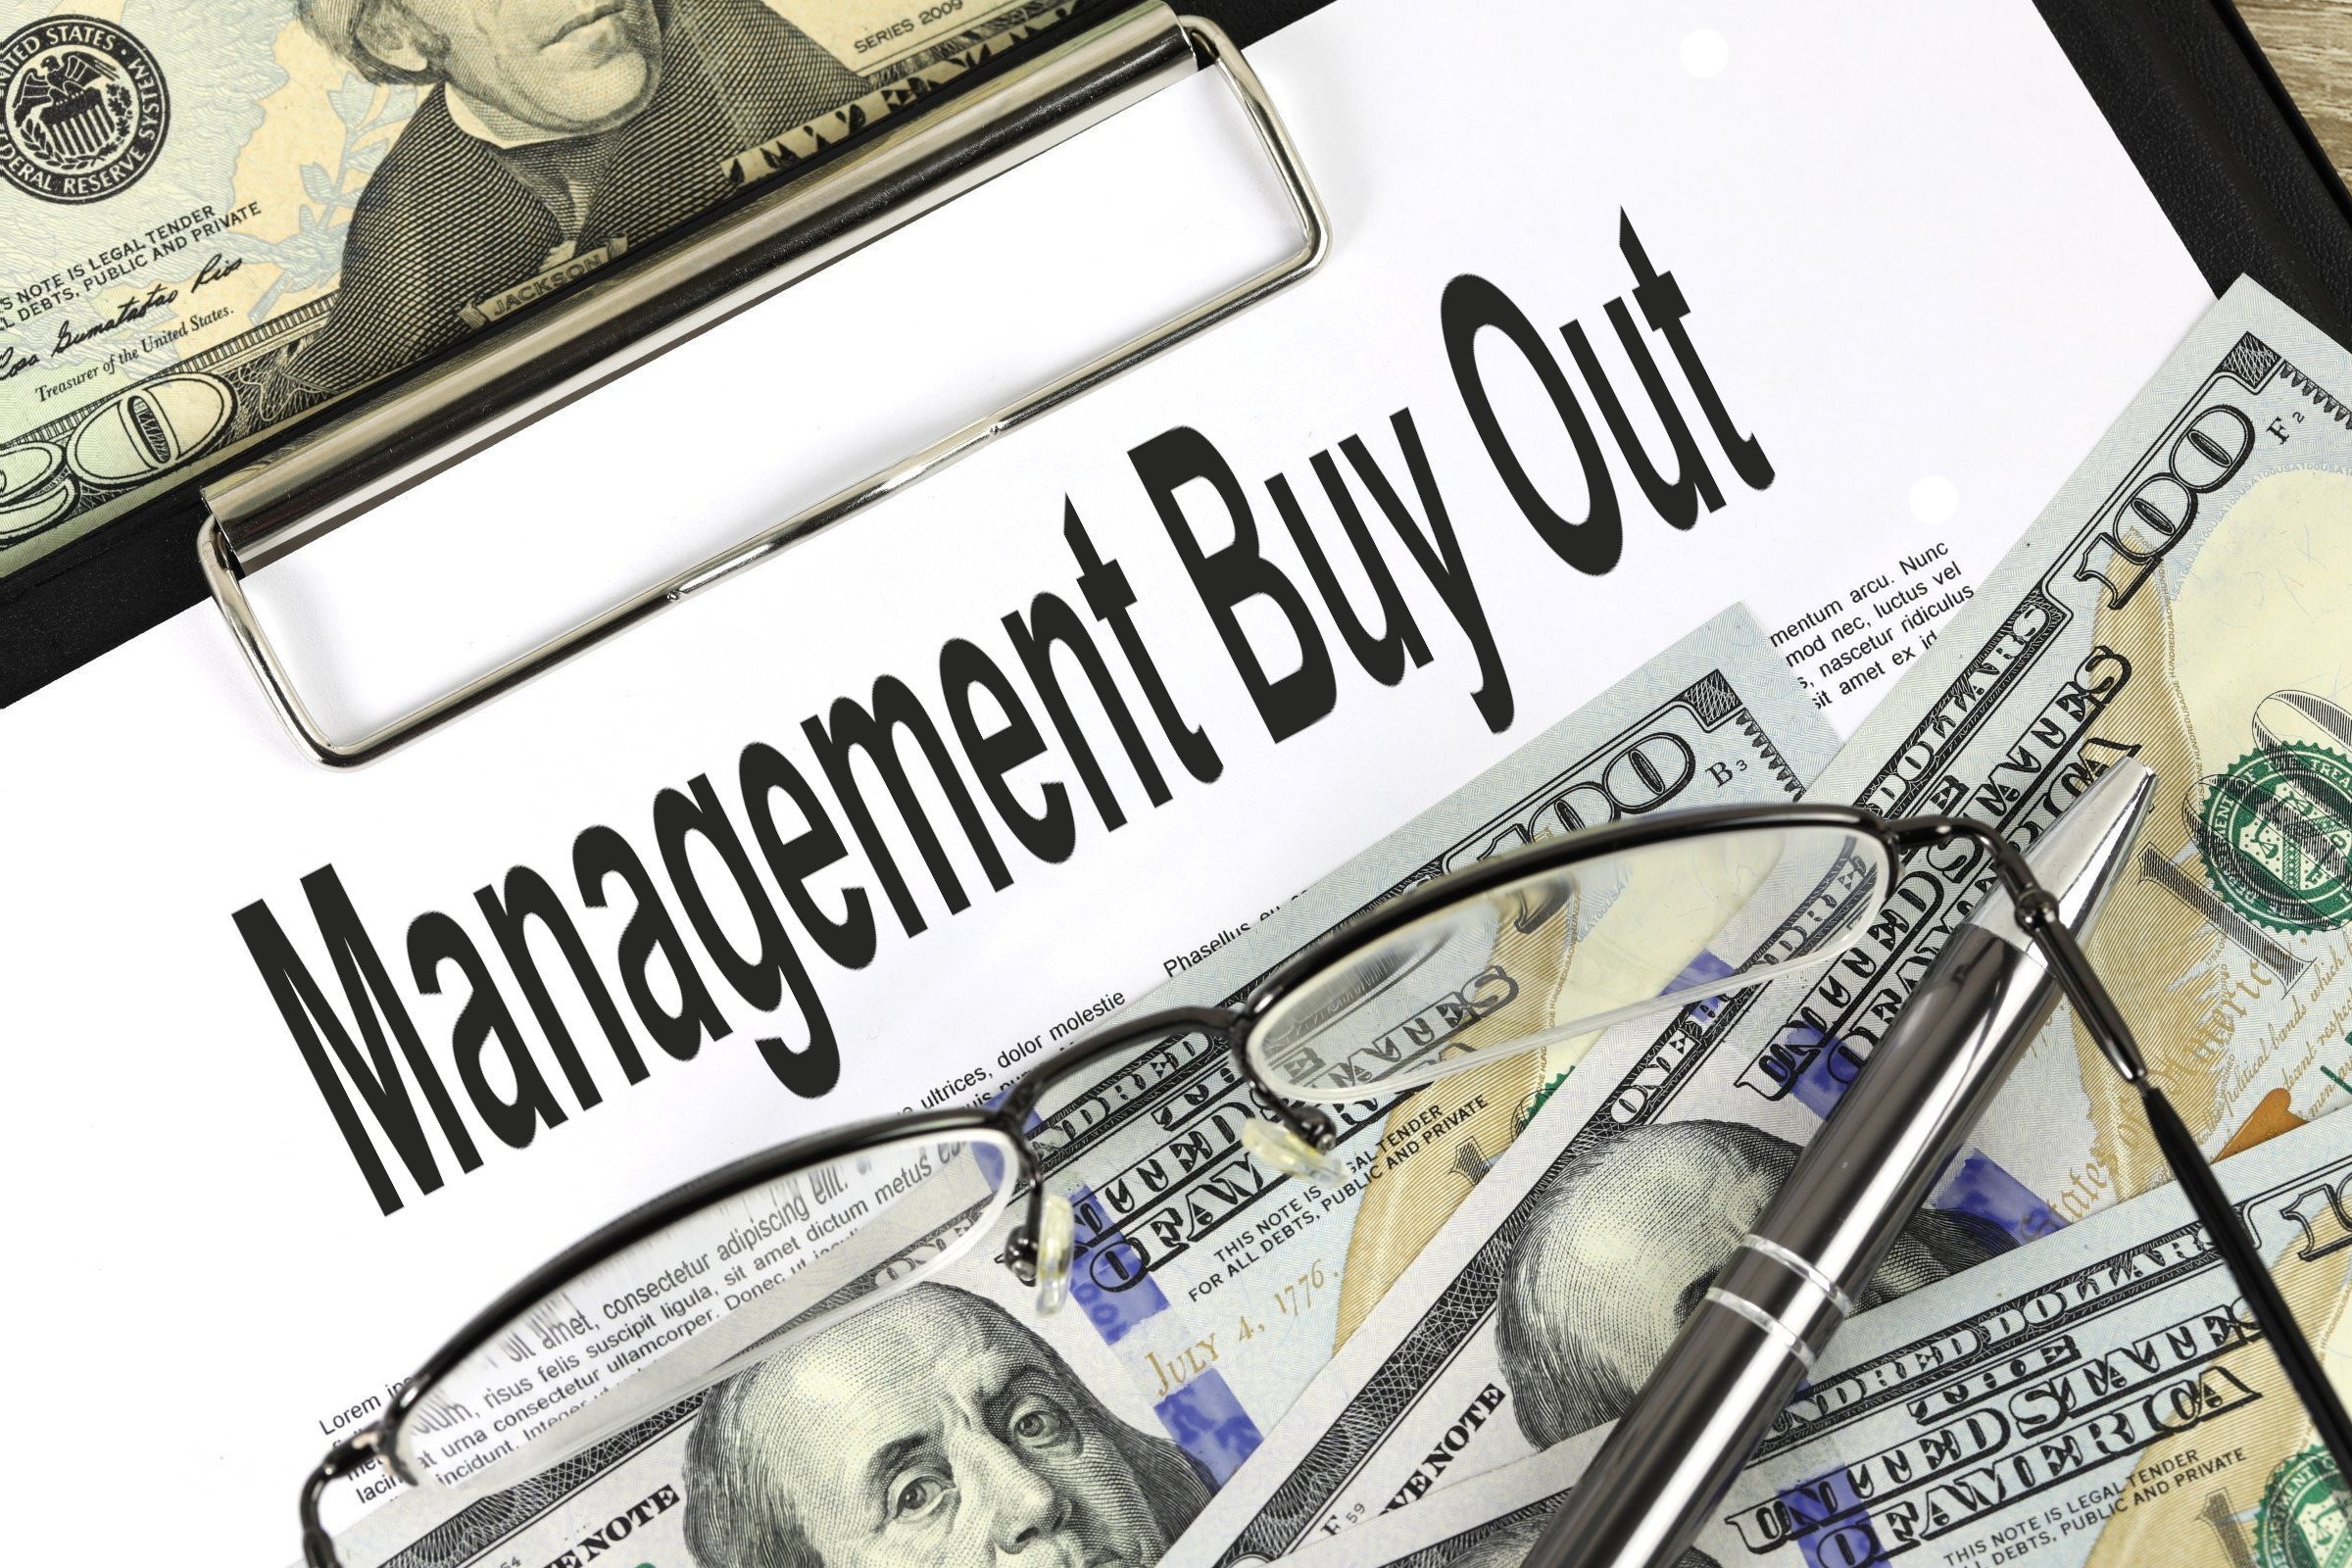 management buy out